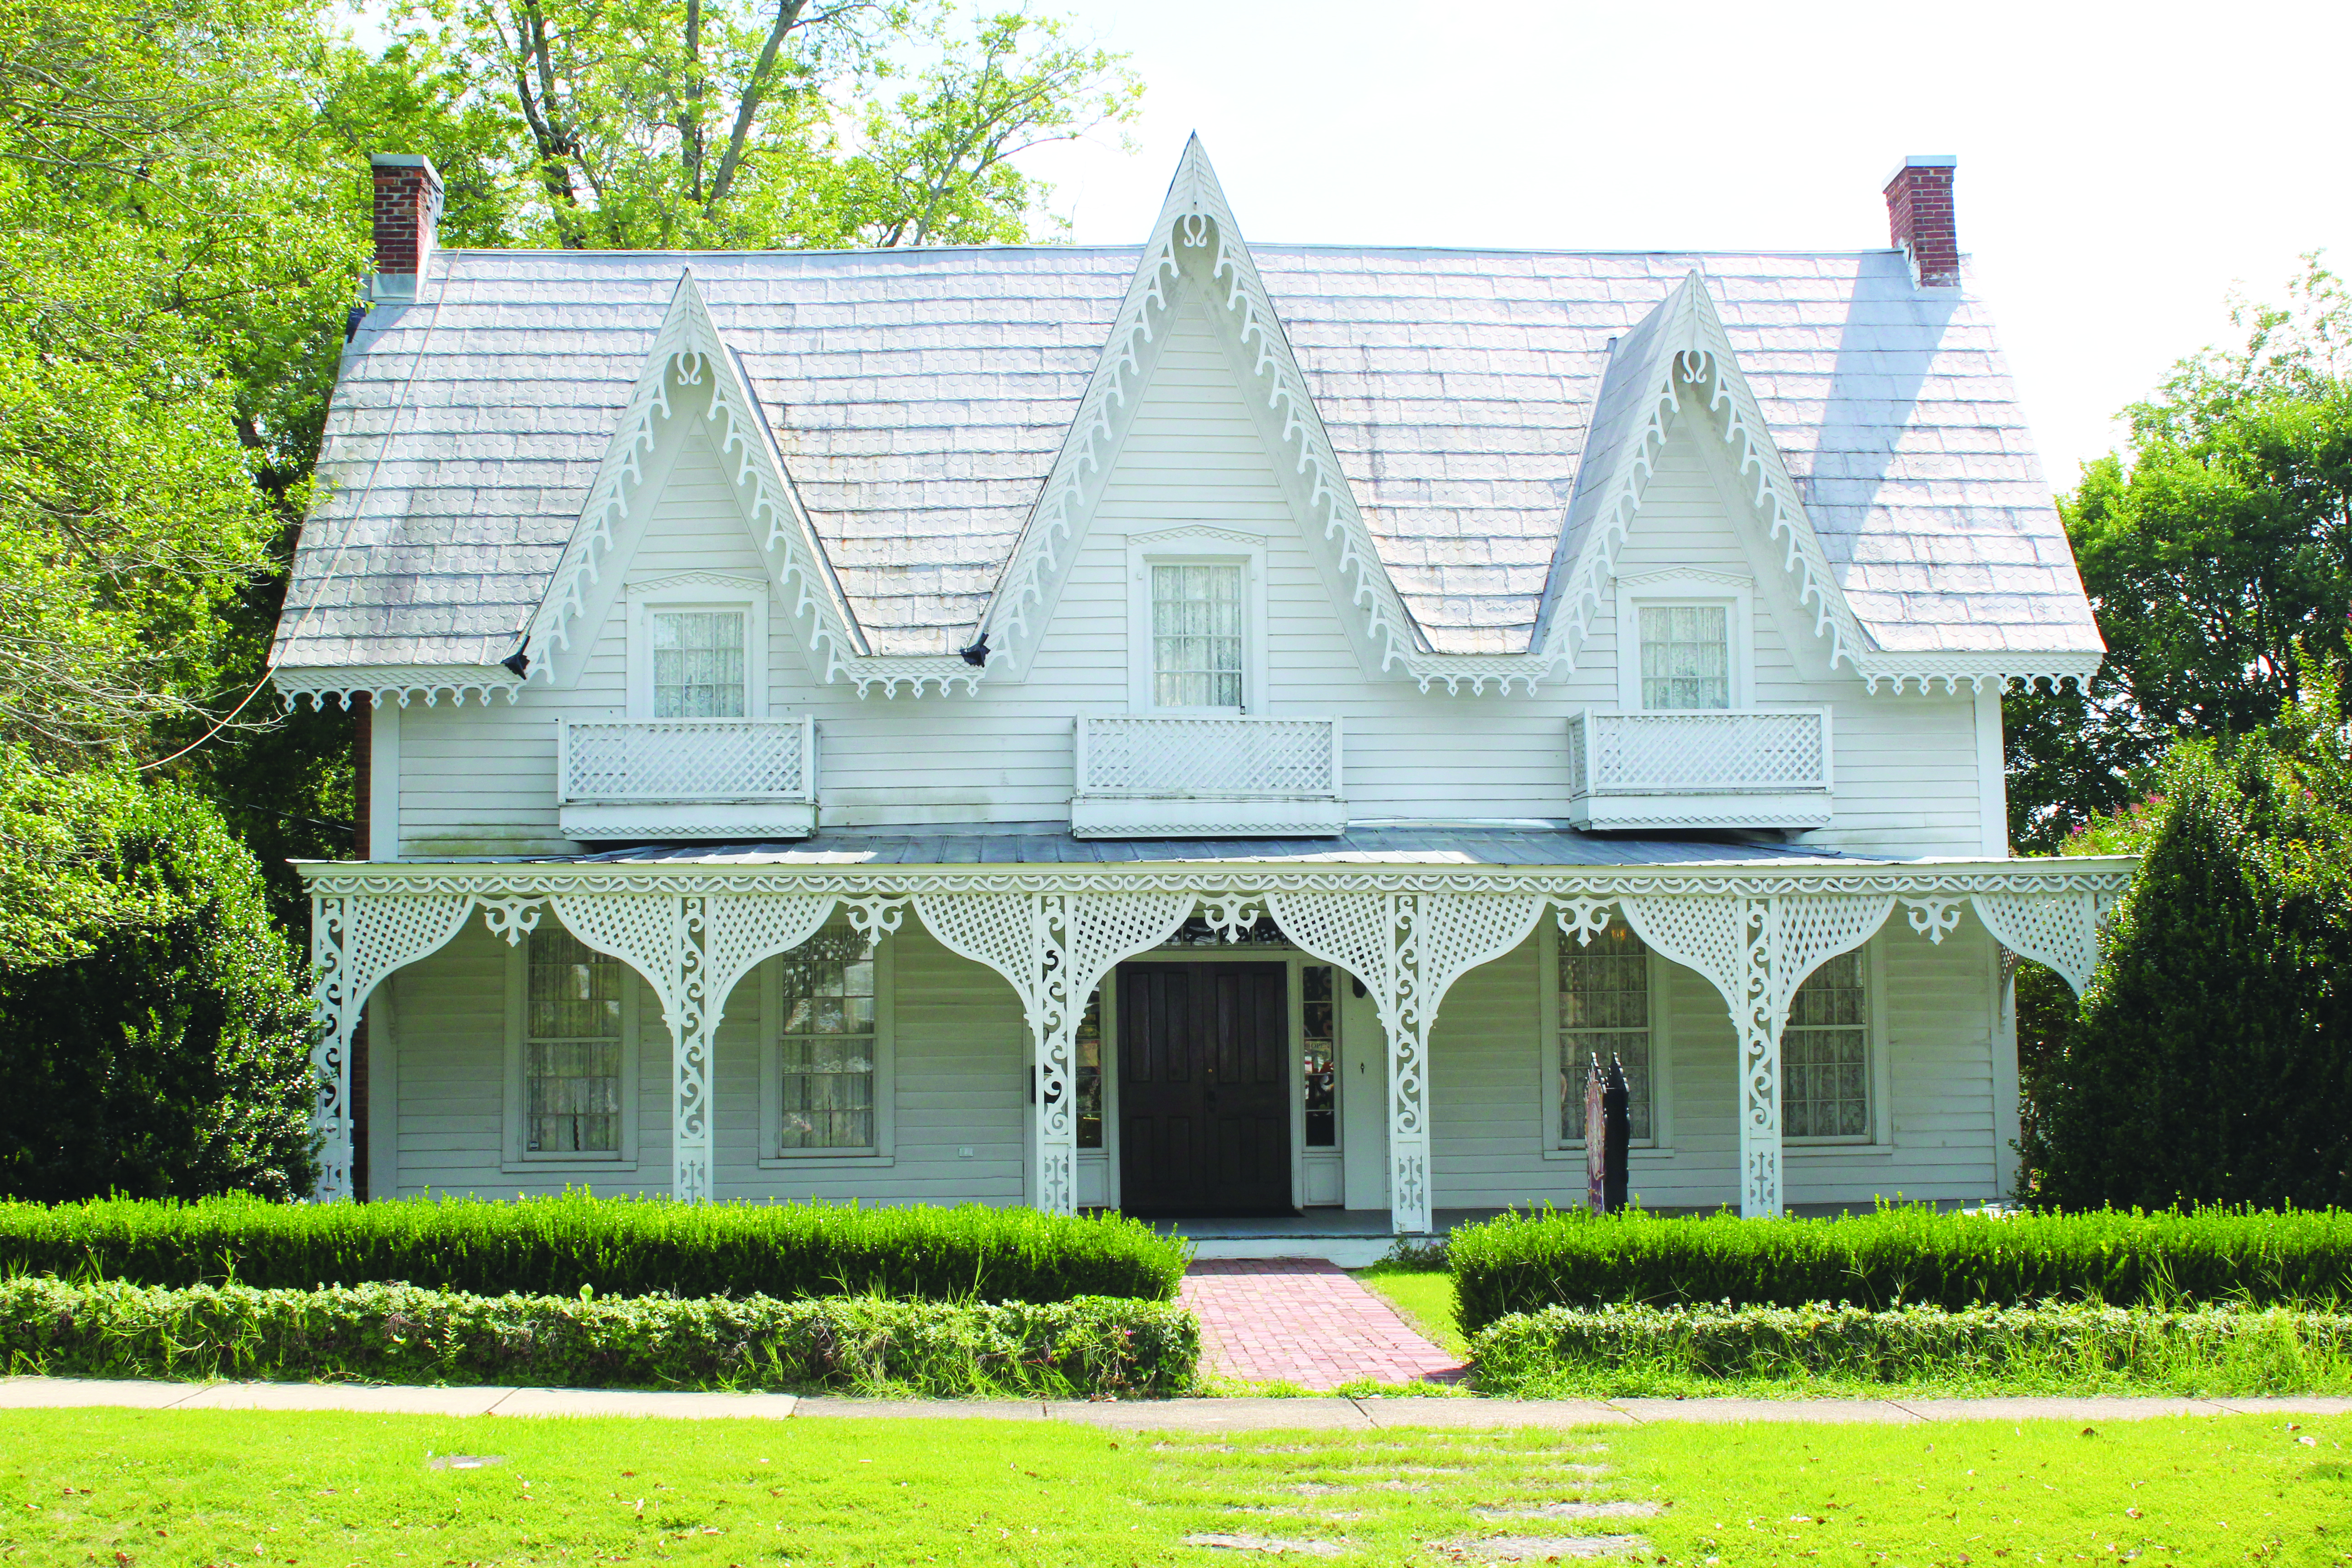 Remembering the history, restoration of Opelika’s Gingerbread House